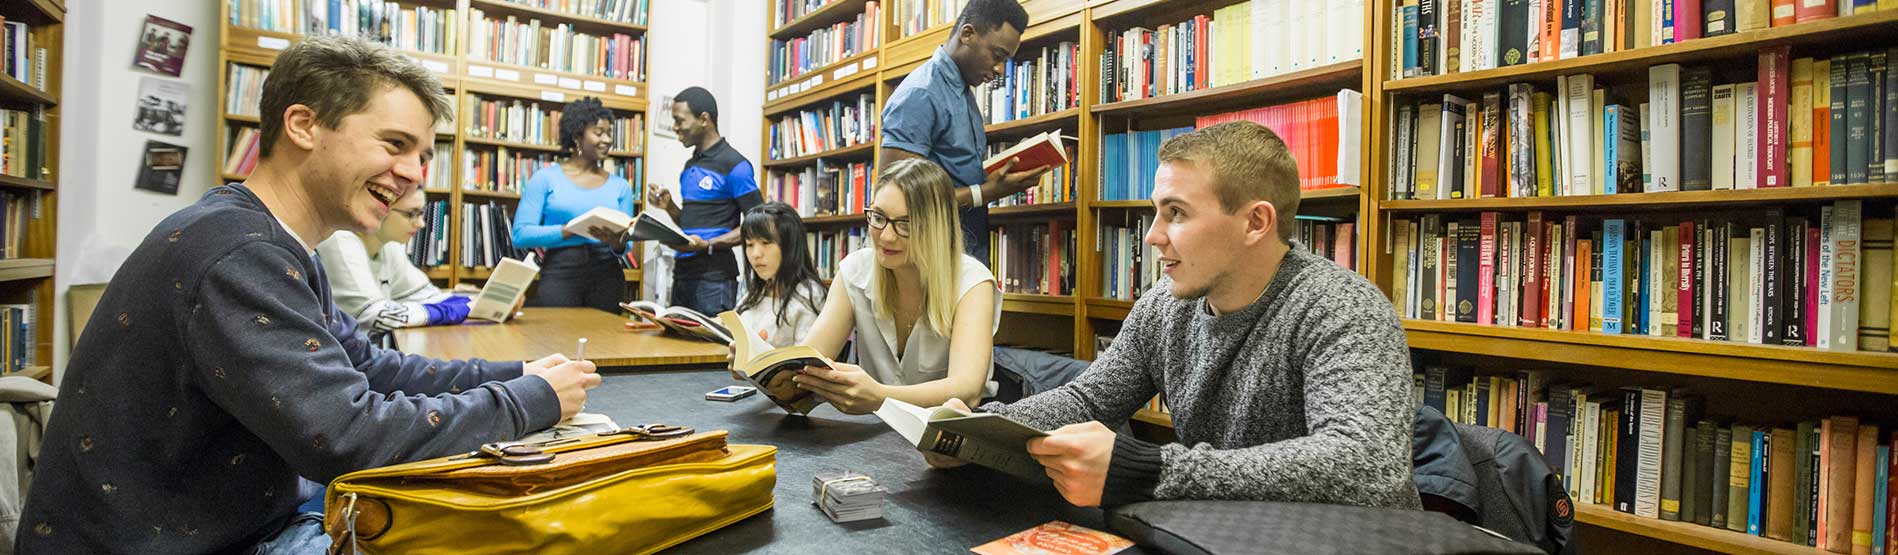 Image of students enjoying their studies in the library